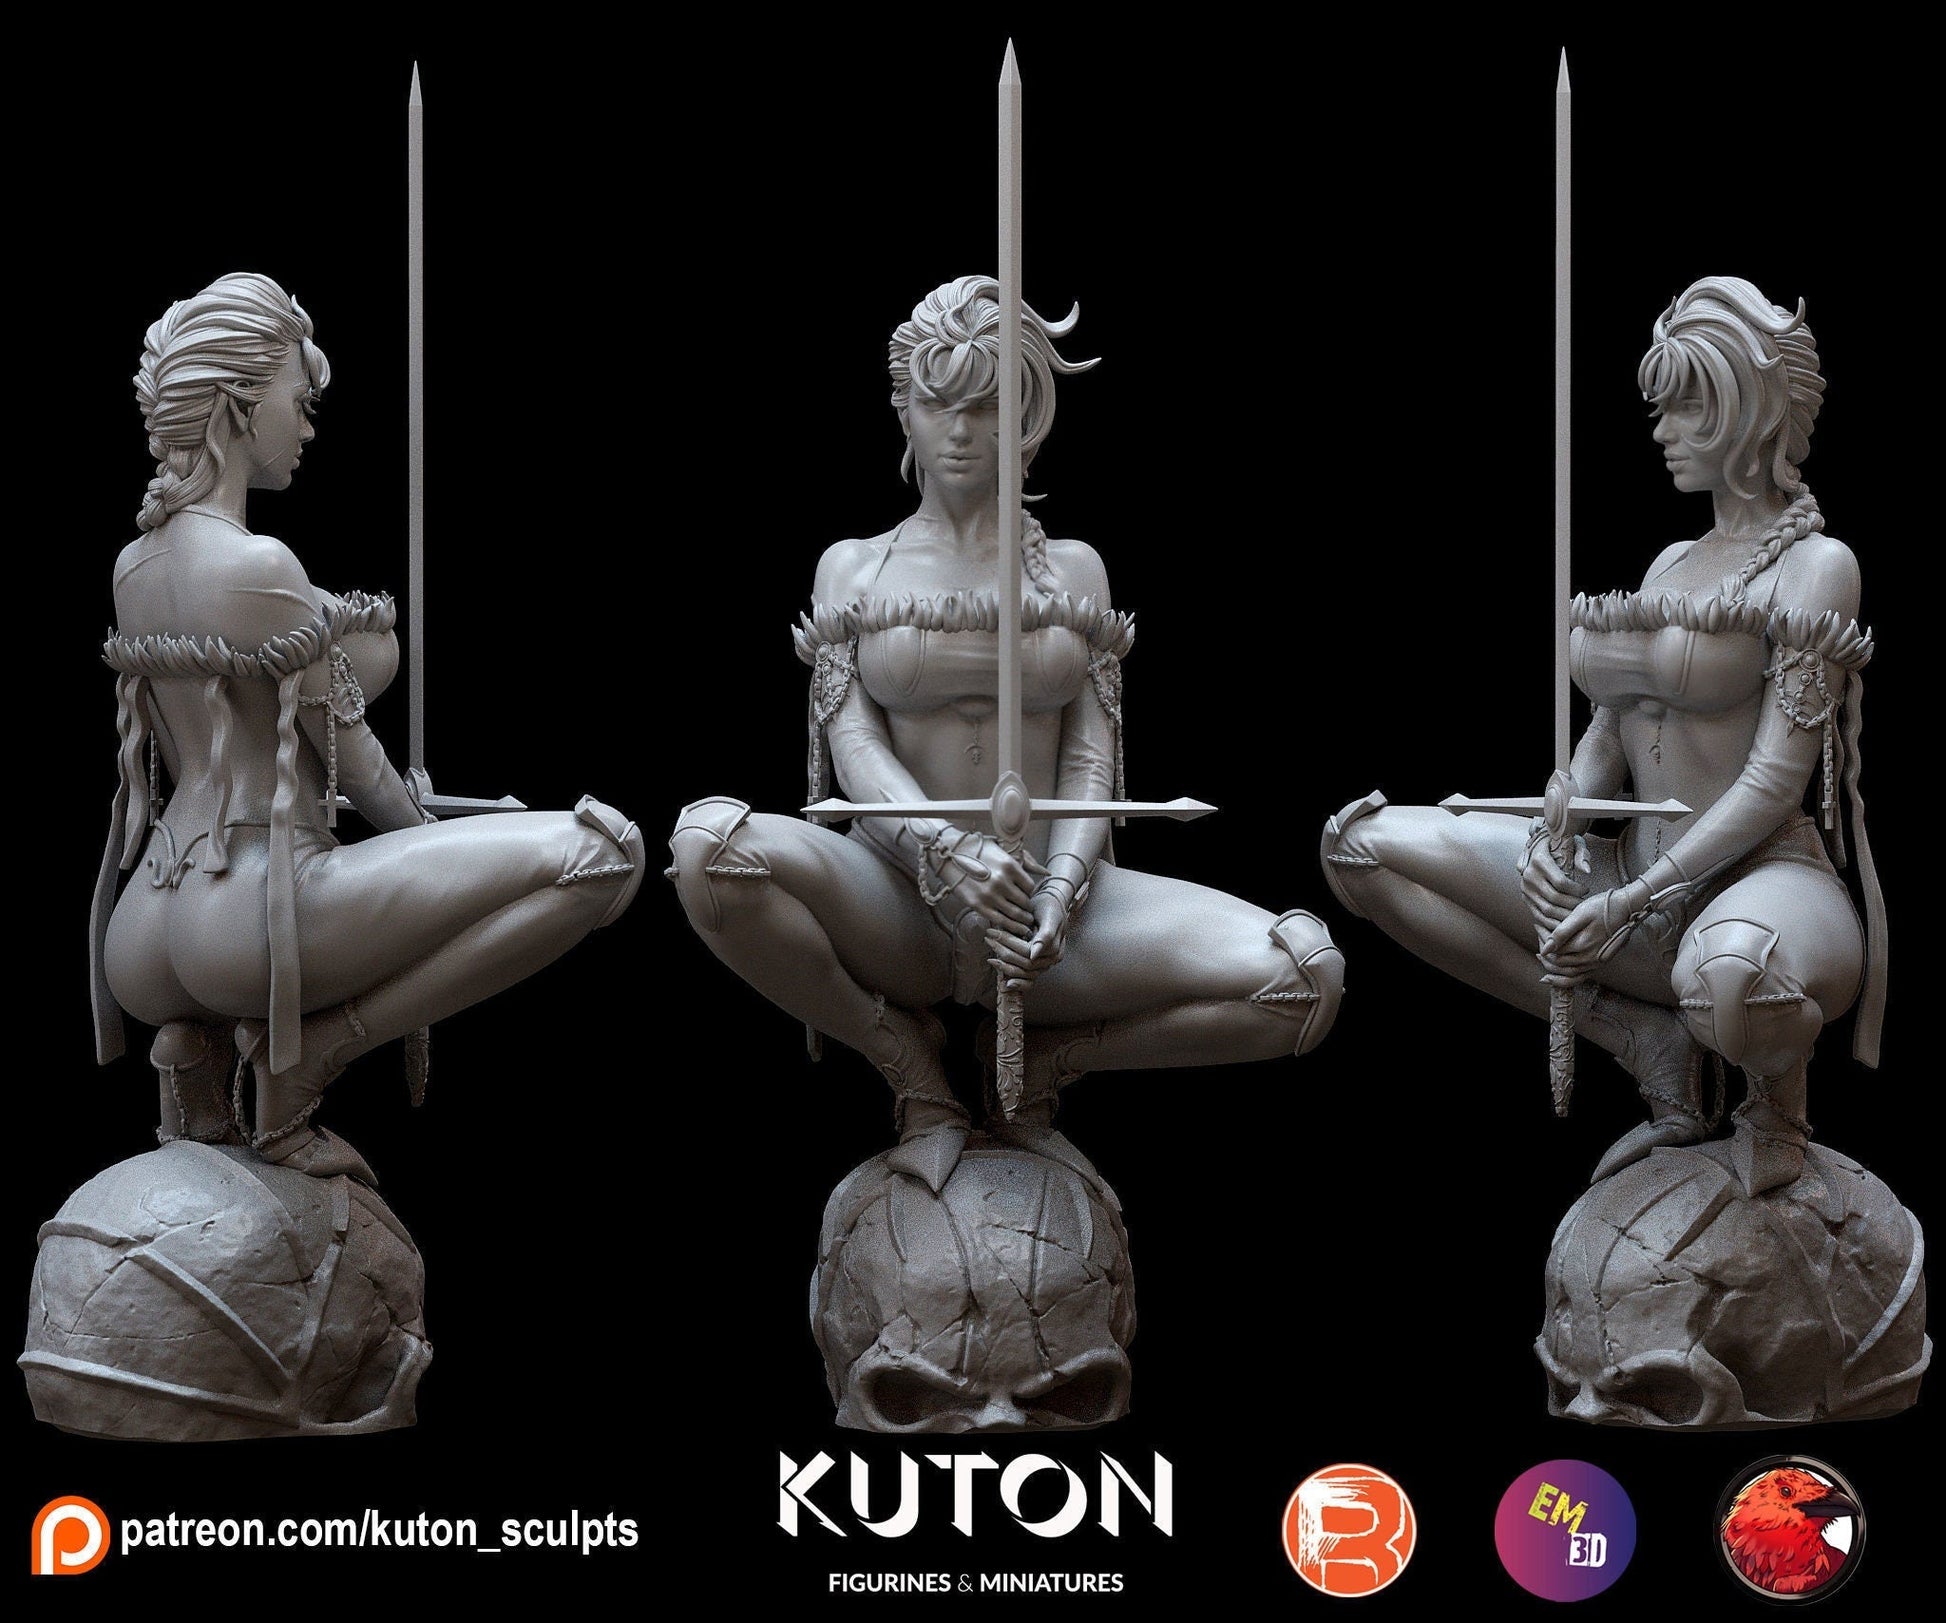 Evil-Lyn DIORAMA 3d printed Resin Figure Model Kit miniatures figurines collectibles and scale models UNPAINTED Fun Art by KUTON FIGURINES